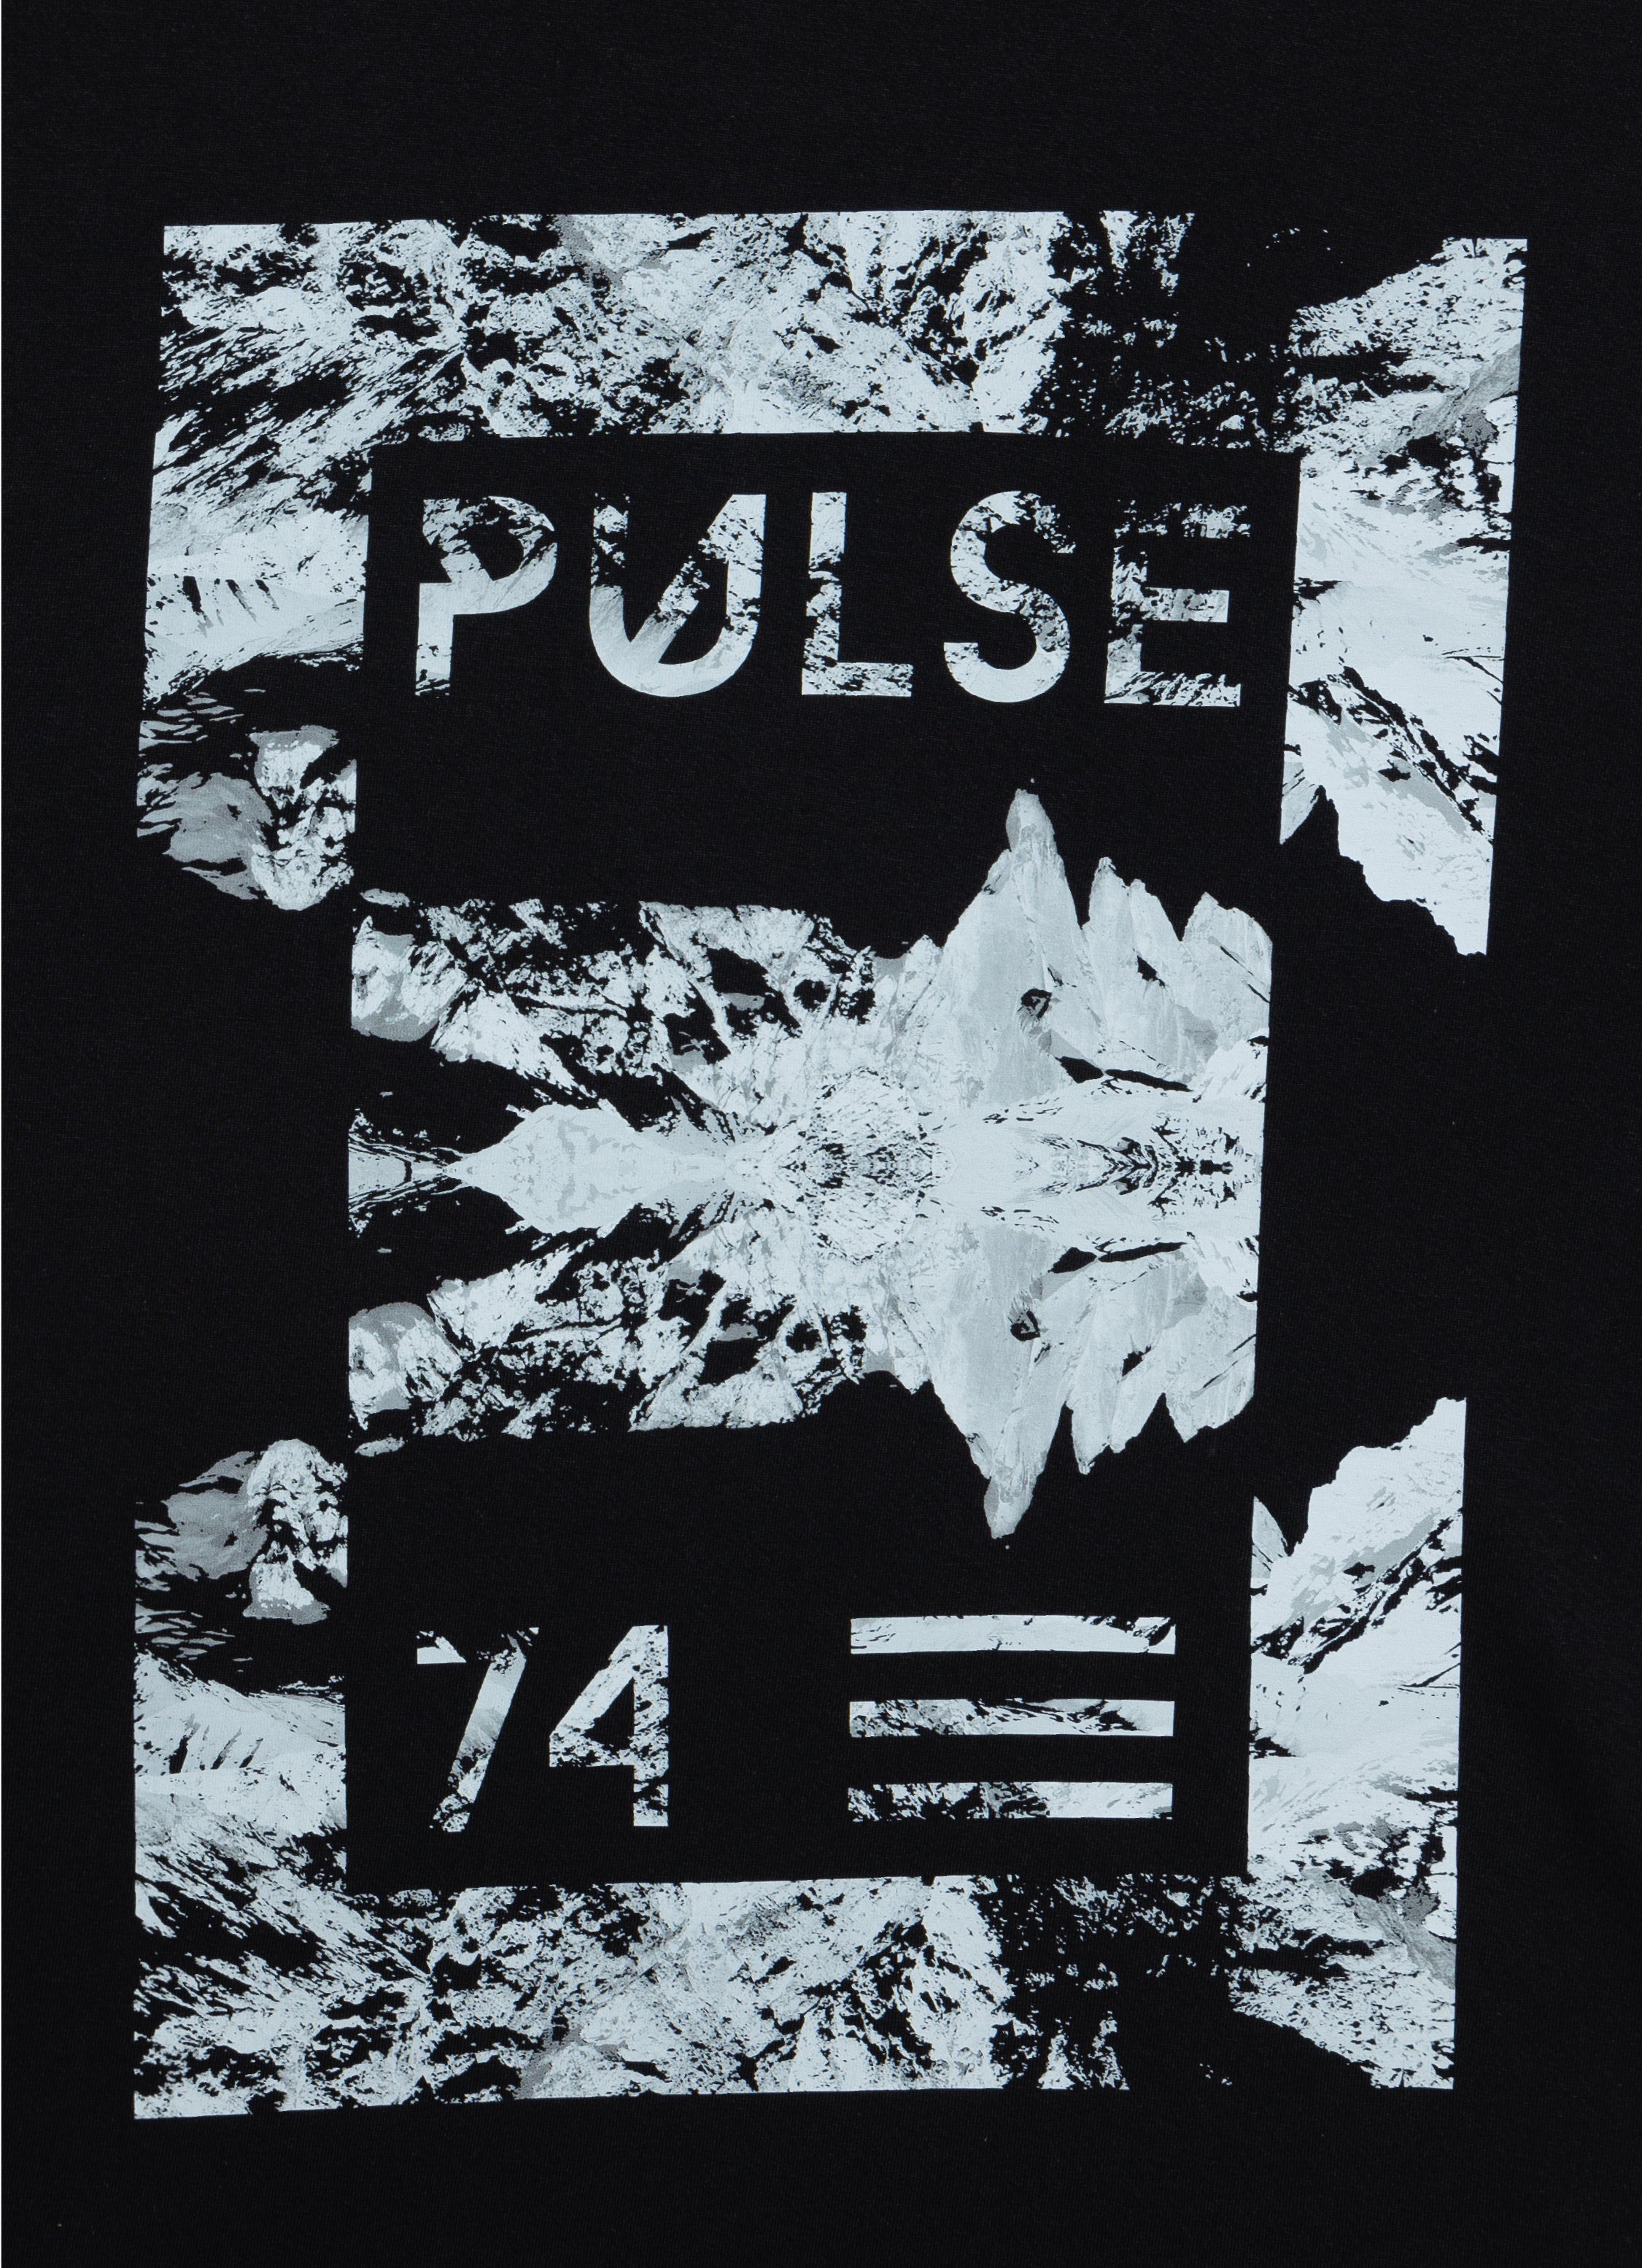 Buy The 97th Hour Abstract Pulse T-shirt - Black Tshirt Back Look